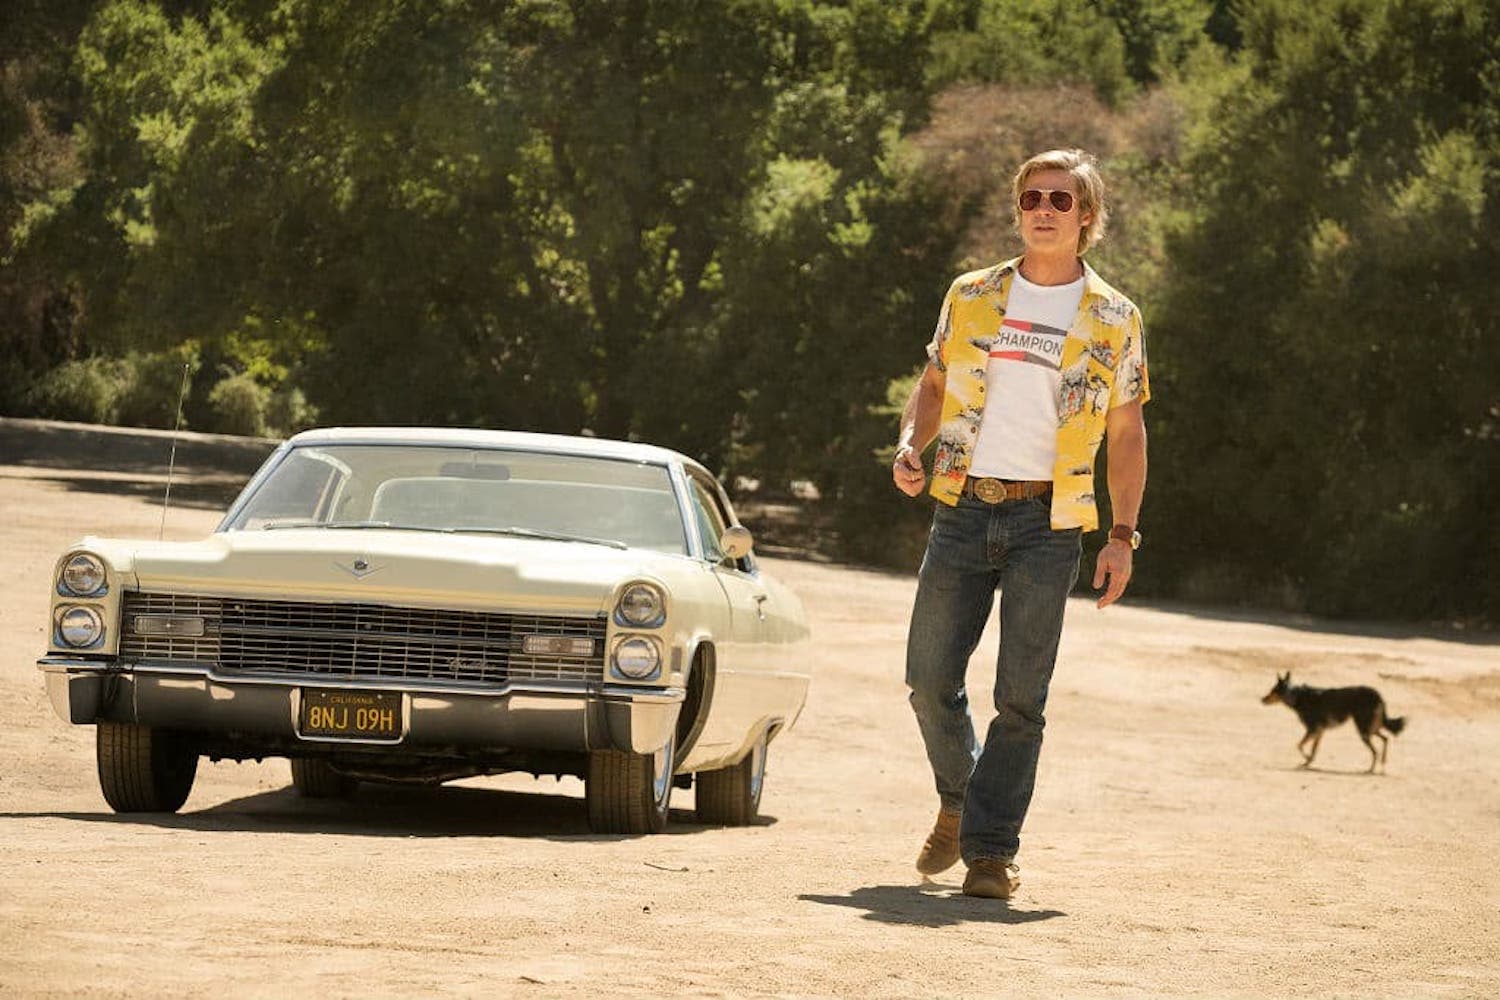 Brad Pitt's Cliff Booth walking away from DiCaprio's 1966 Cadillac Coupe DeVille in a scene from Once Upon a Time in Hollywood